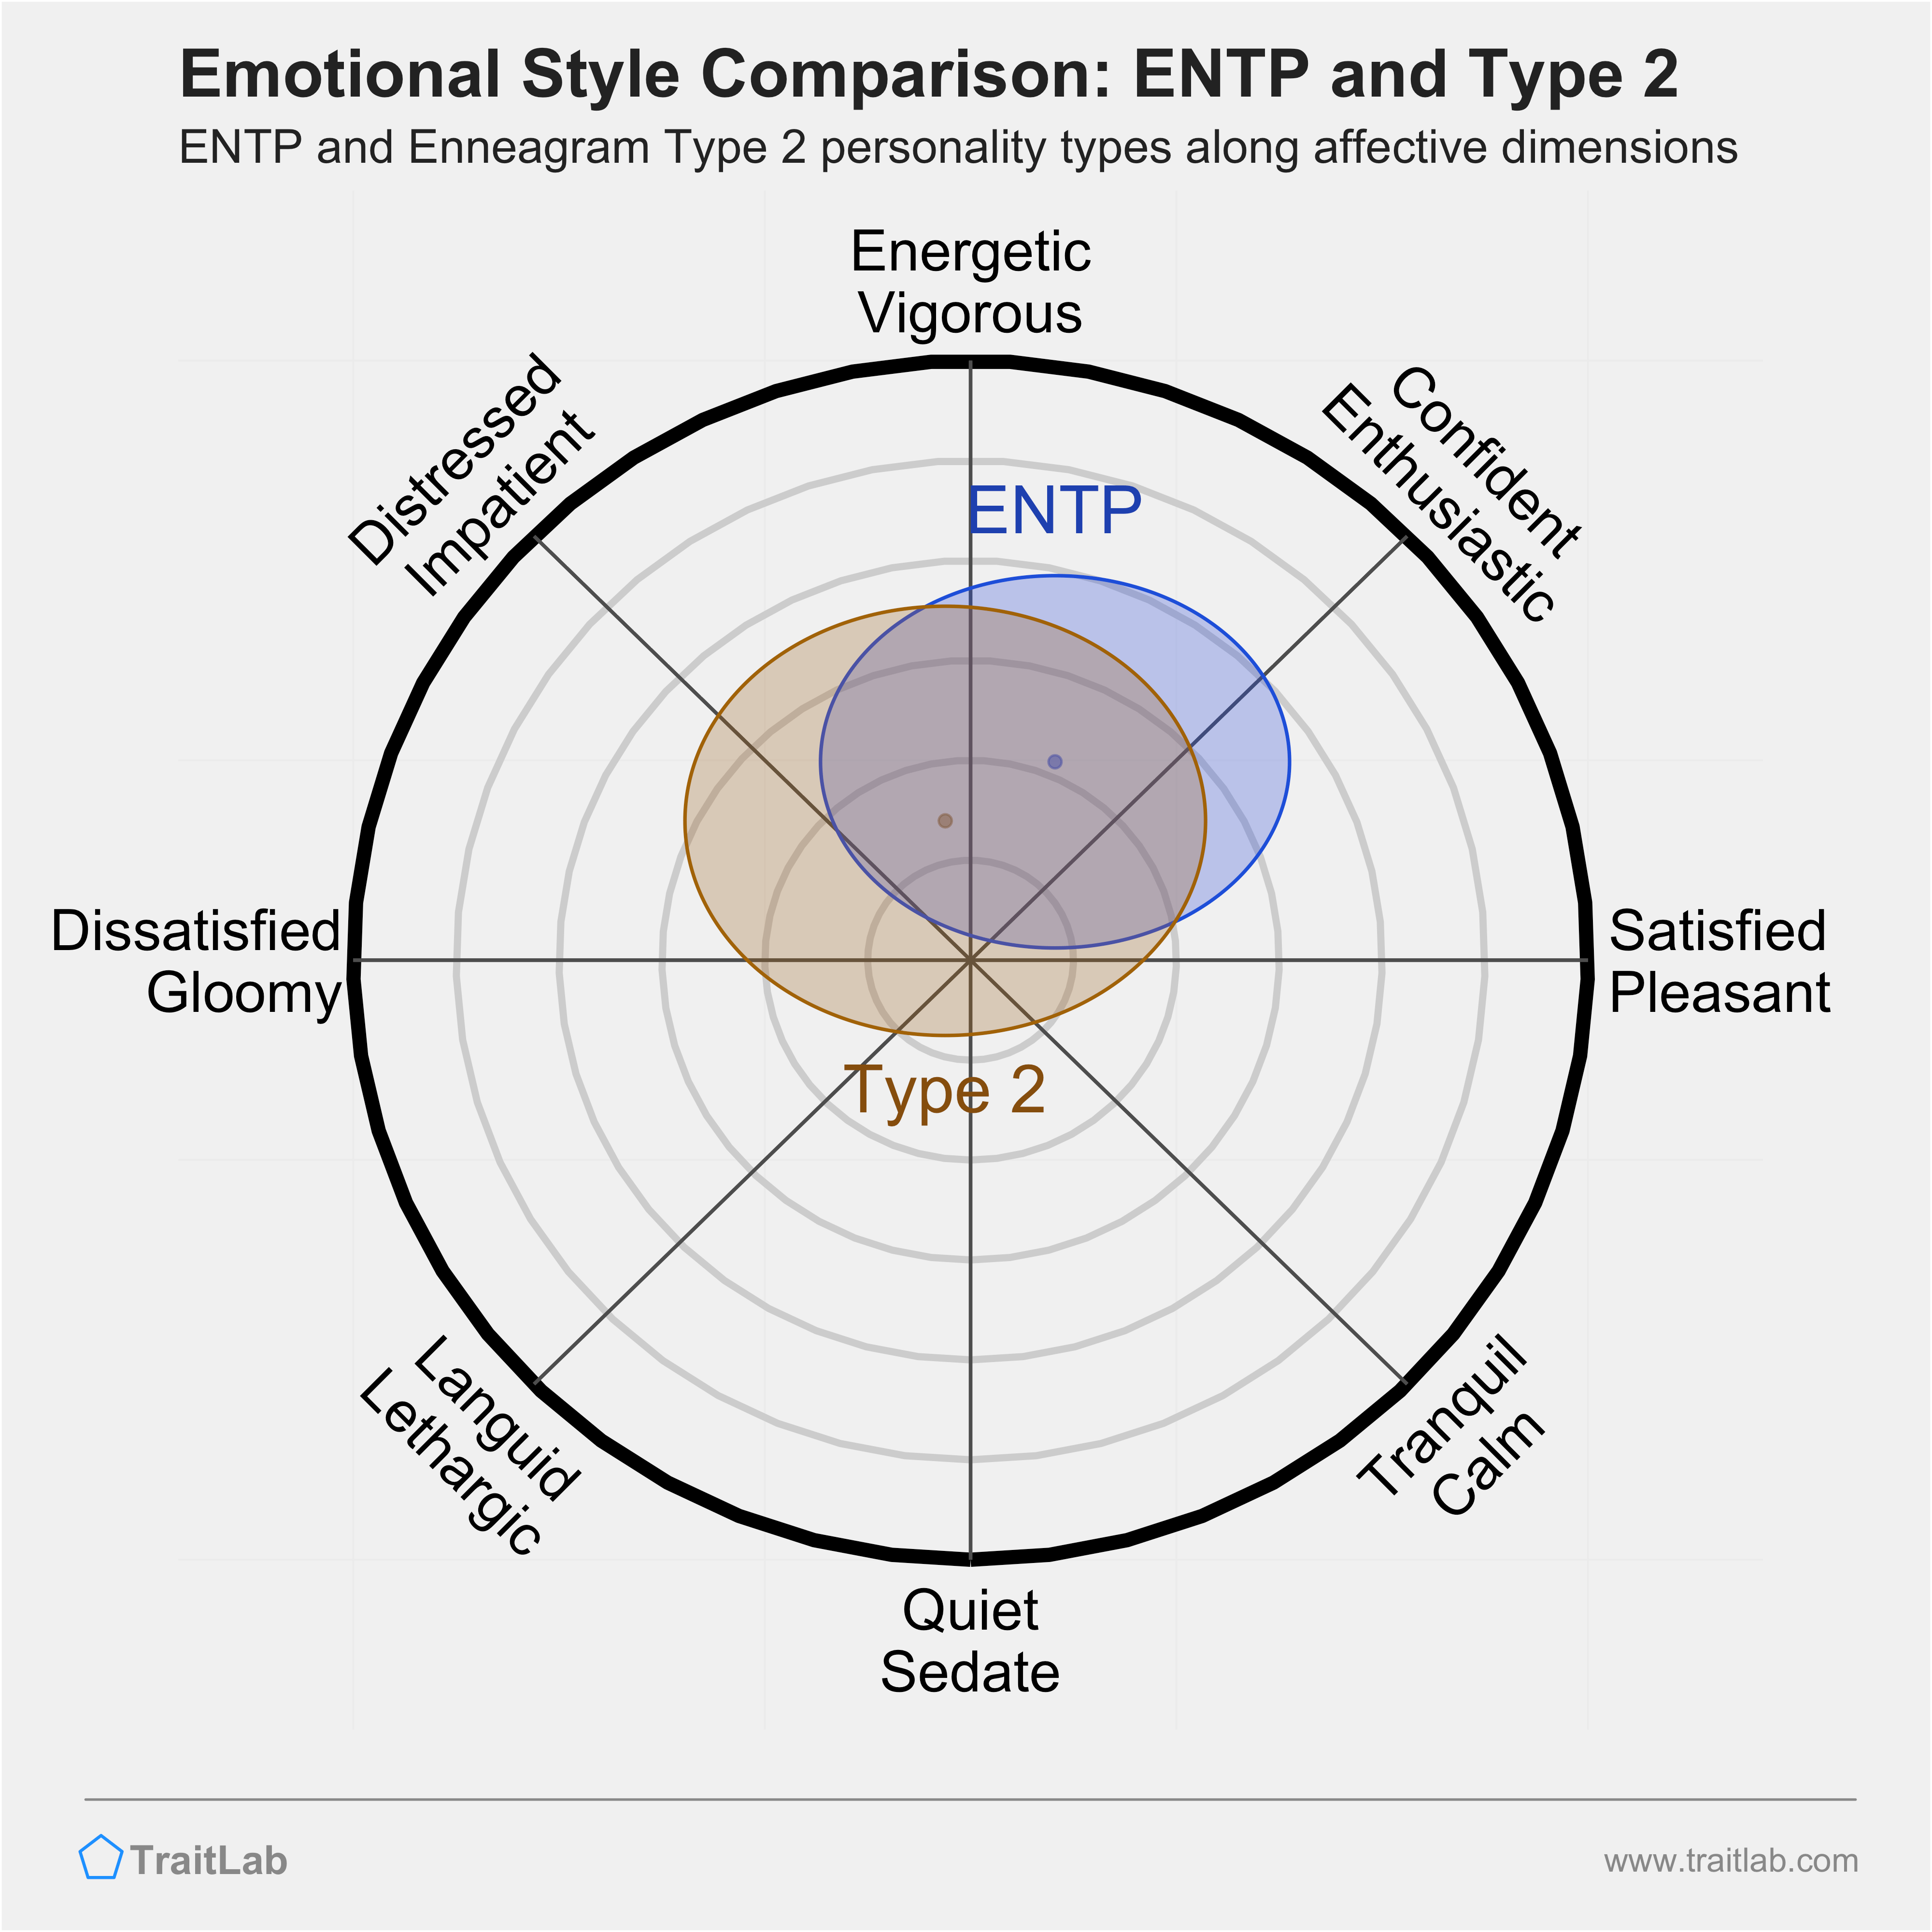 ENTP and Type 2 comparison across emotional (affective) dimensions